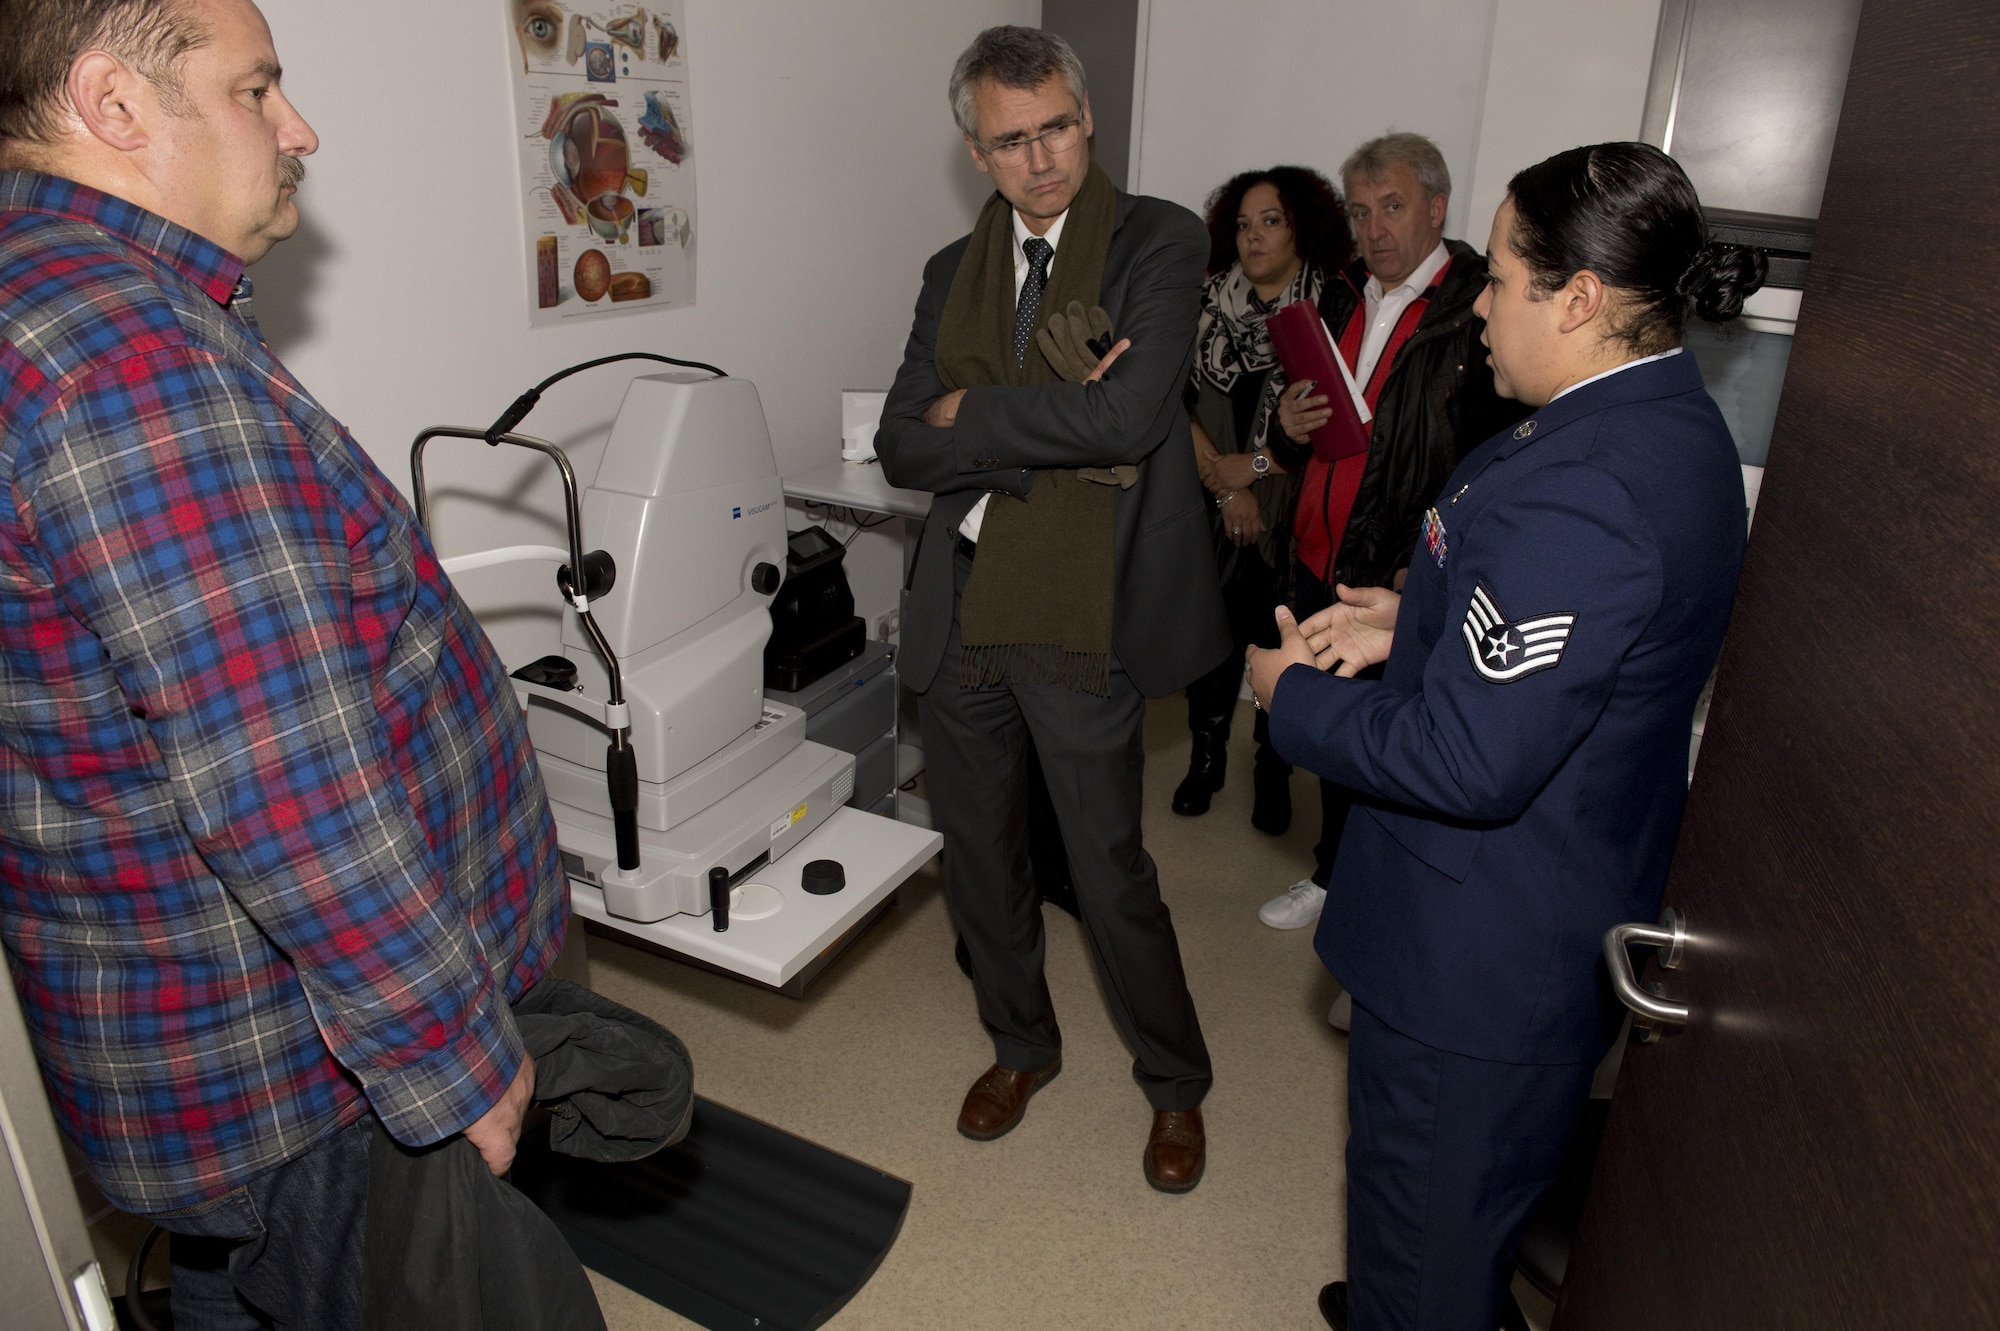 Staff Sgt. Ivonn Denton, an optometry clinic technician at the medical treatment facility at Spangdahlem Air Base, Germany, tells a group of German doctors about the optometry clinic’s optical coherence tomography machine, which measures optic nerve function, during the Spangdahlem MTF’s Eifel Health Consortium Oct. 27. More than 20 German doctors from four major, local hospitals in Bitburg, Trier, and Wittlich, Germany attended the event.  